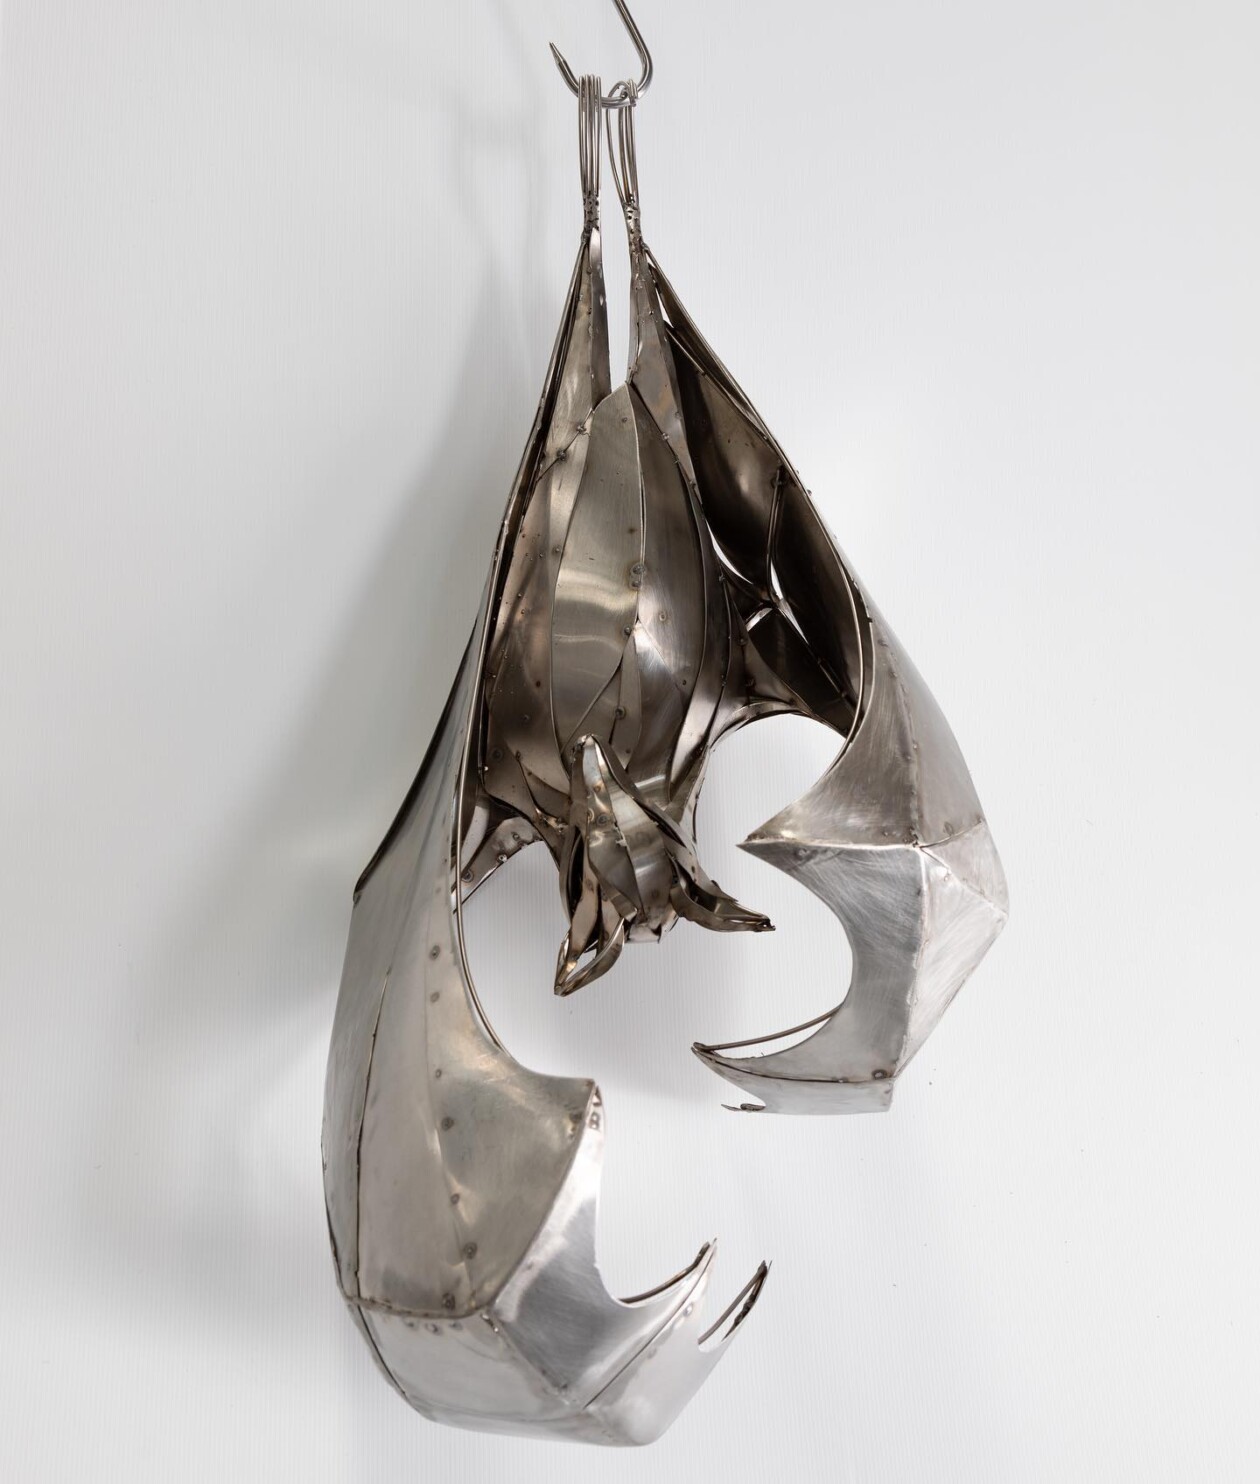 Magnificent Metallic Animal Sculptures Made With Sweeping Lines By Georgie Seccull (6)